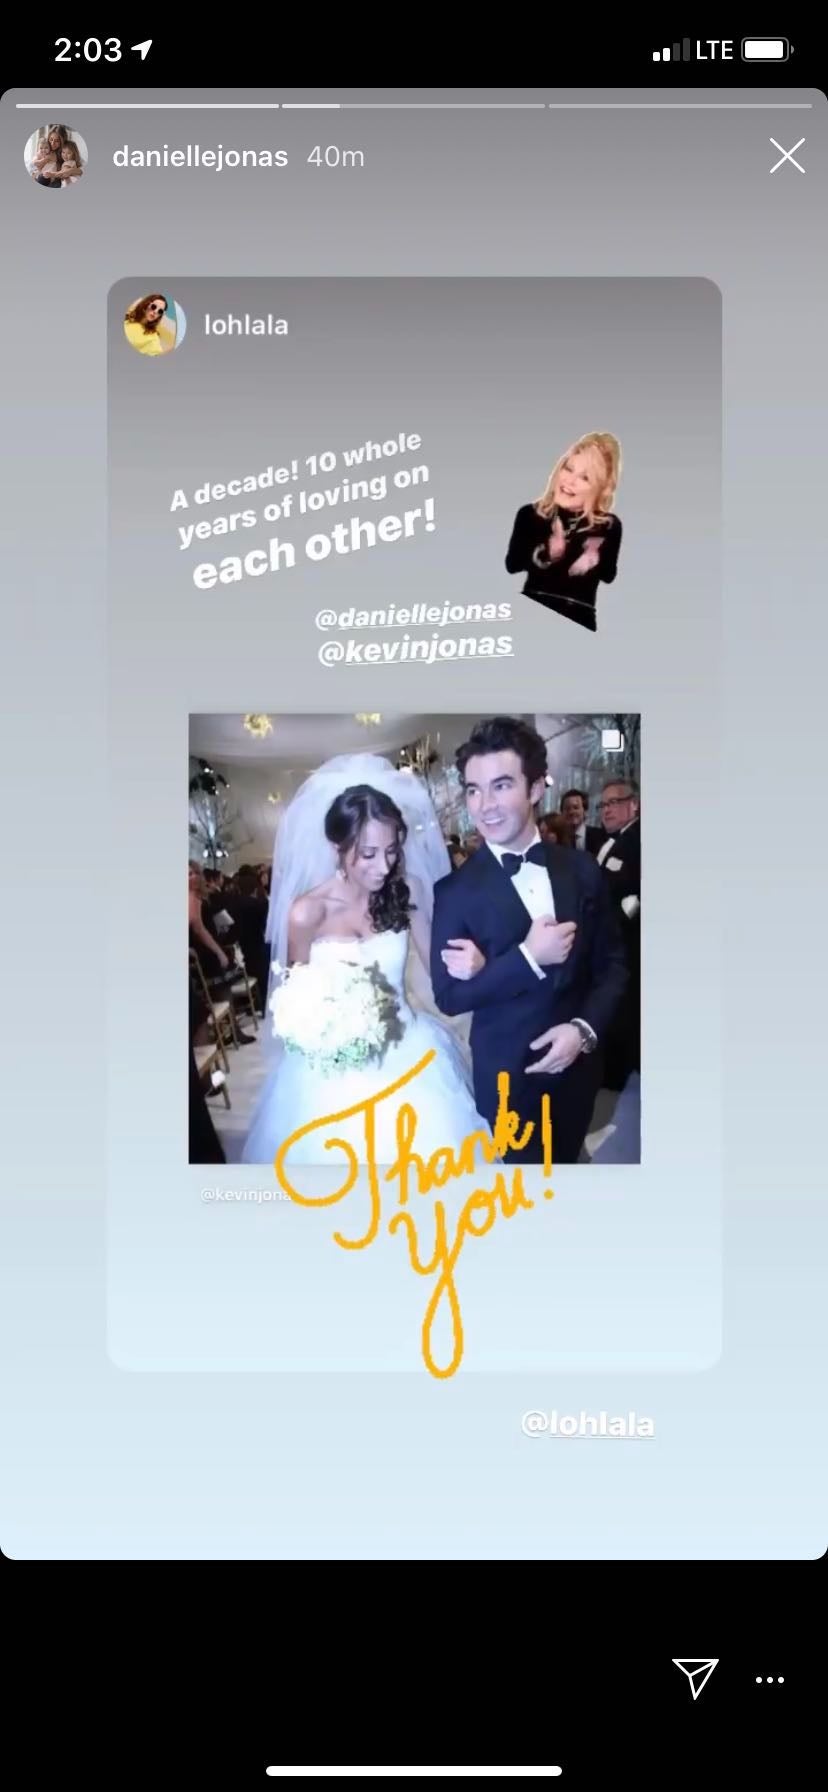 Kevin Jonas pays tribute to wife for 8th anniversary - 8days